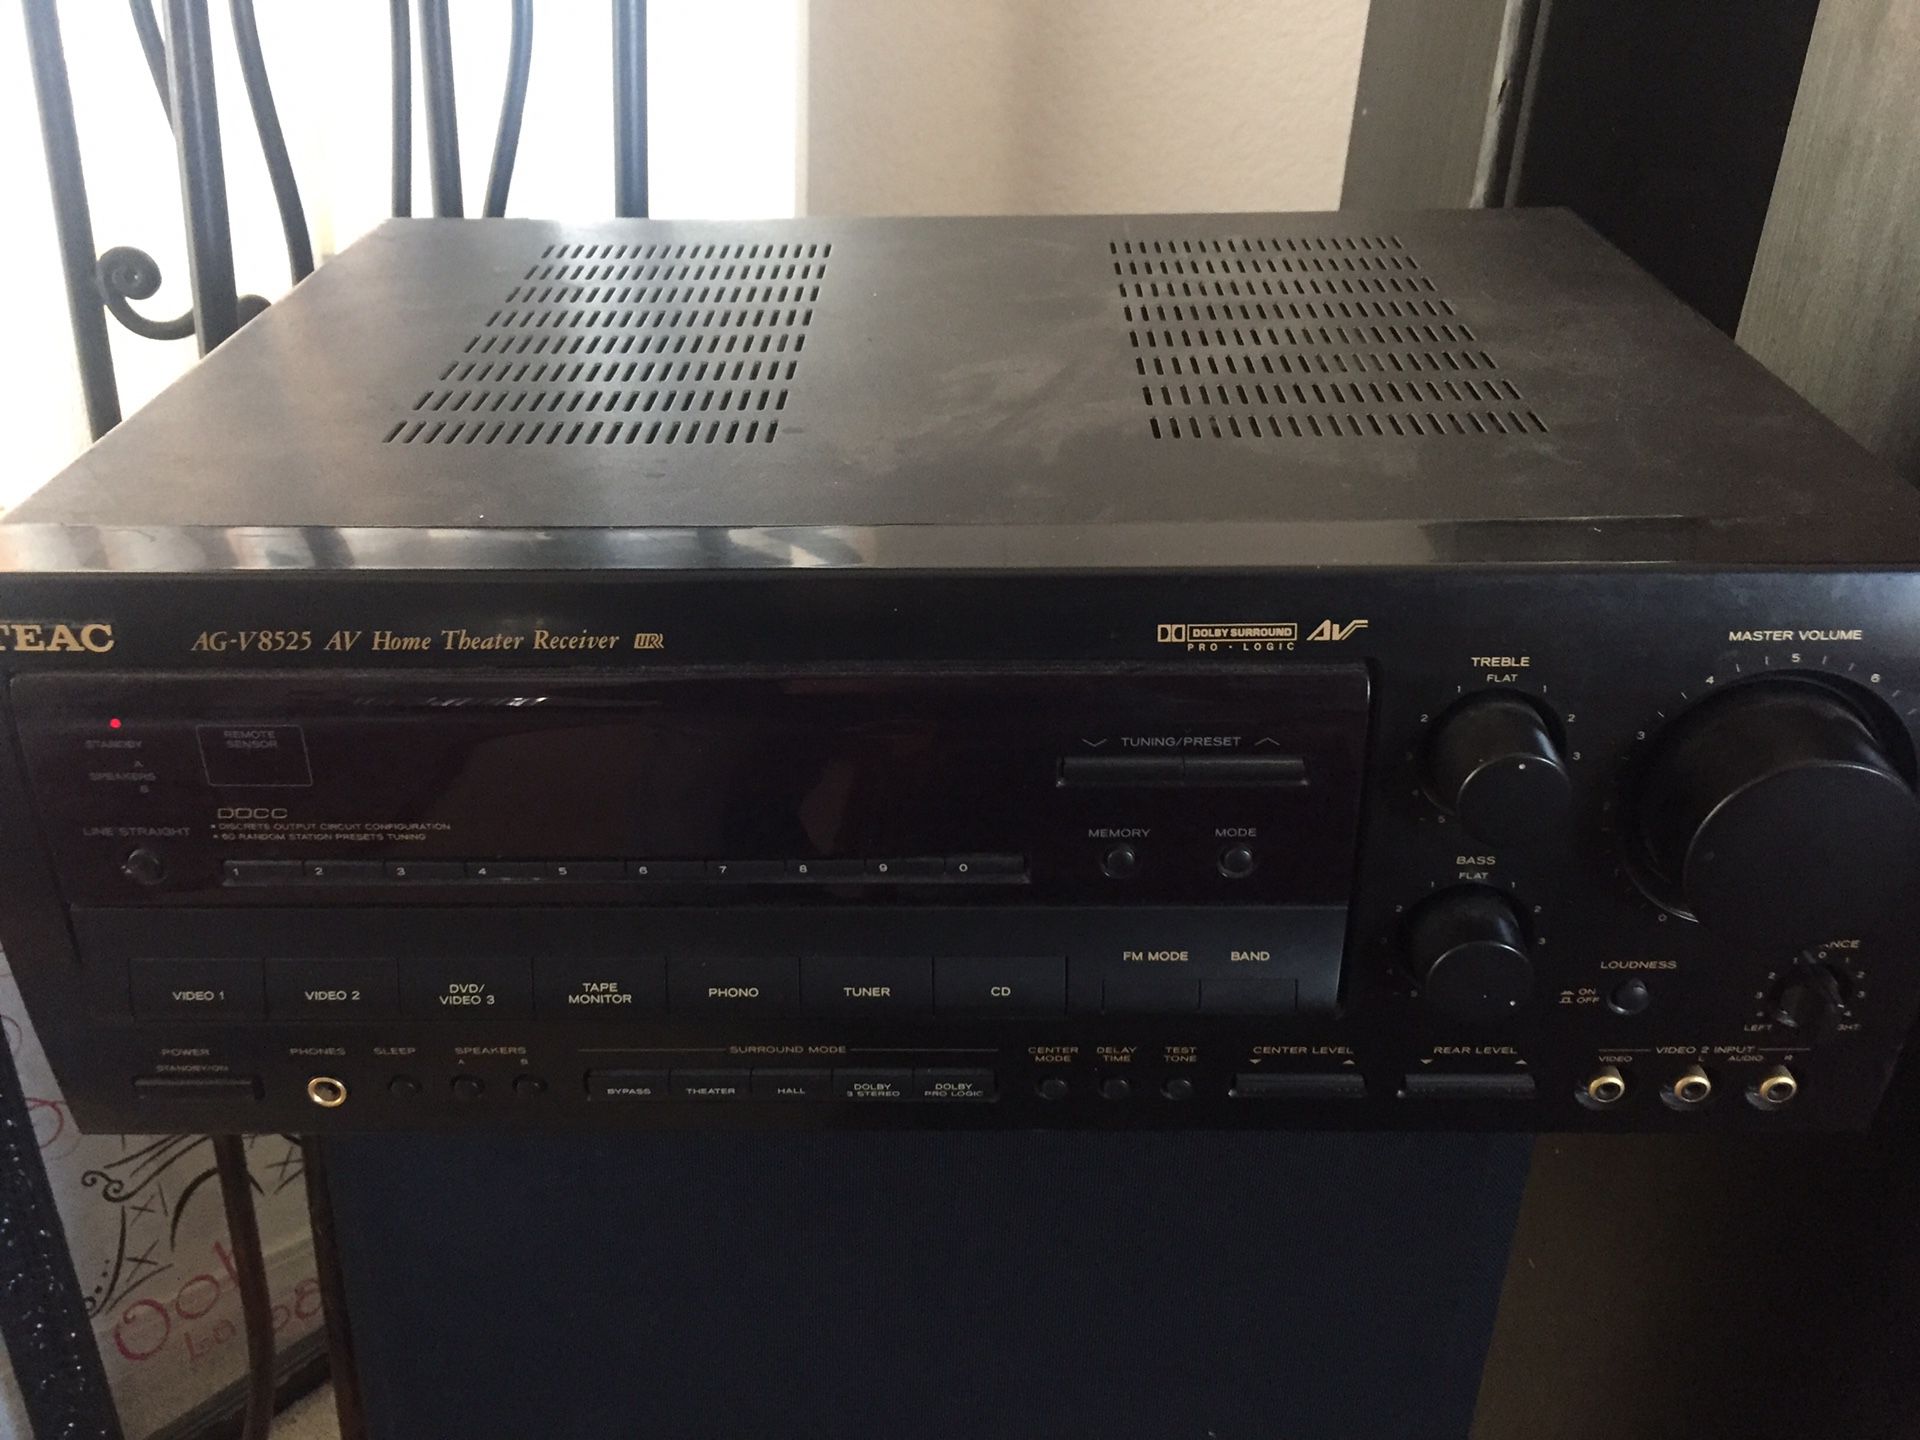 Teach AGAIN-V8525 home theater Receiver 100 W, w/Two Tall pioneer Speakers 150 W ,$95 Deliver available